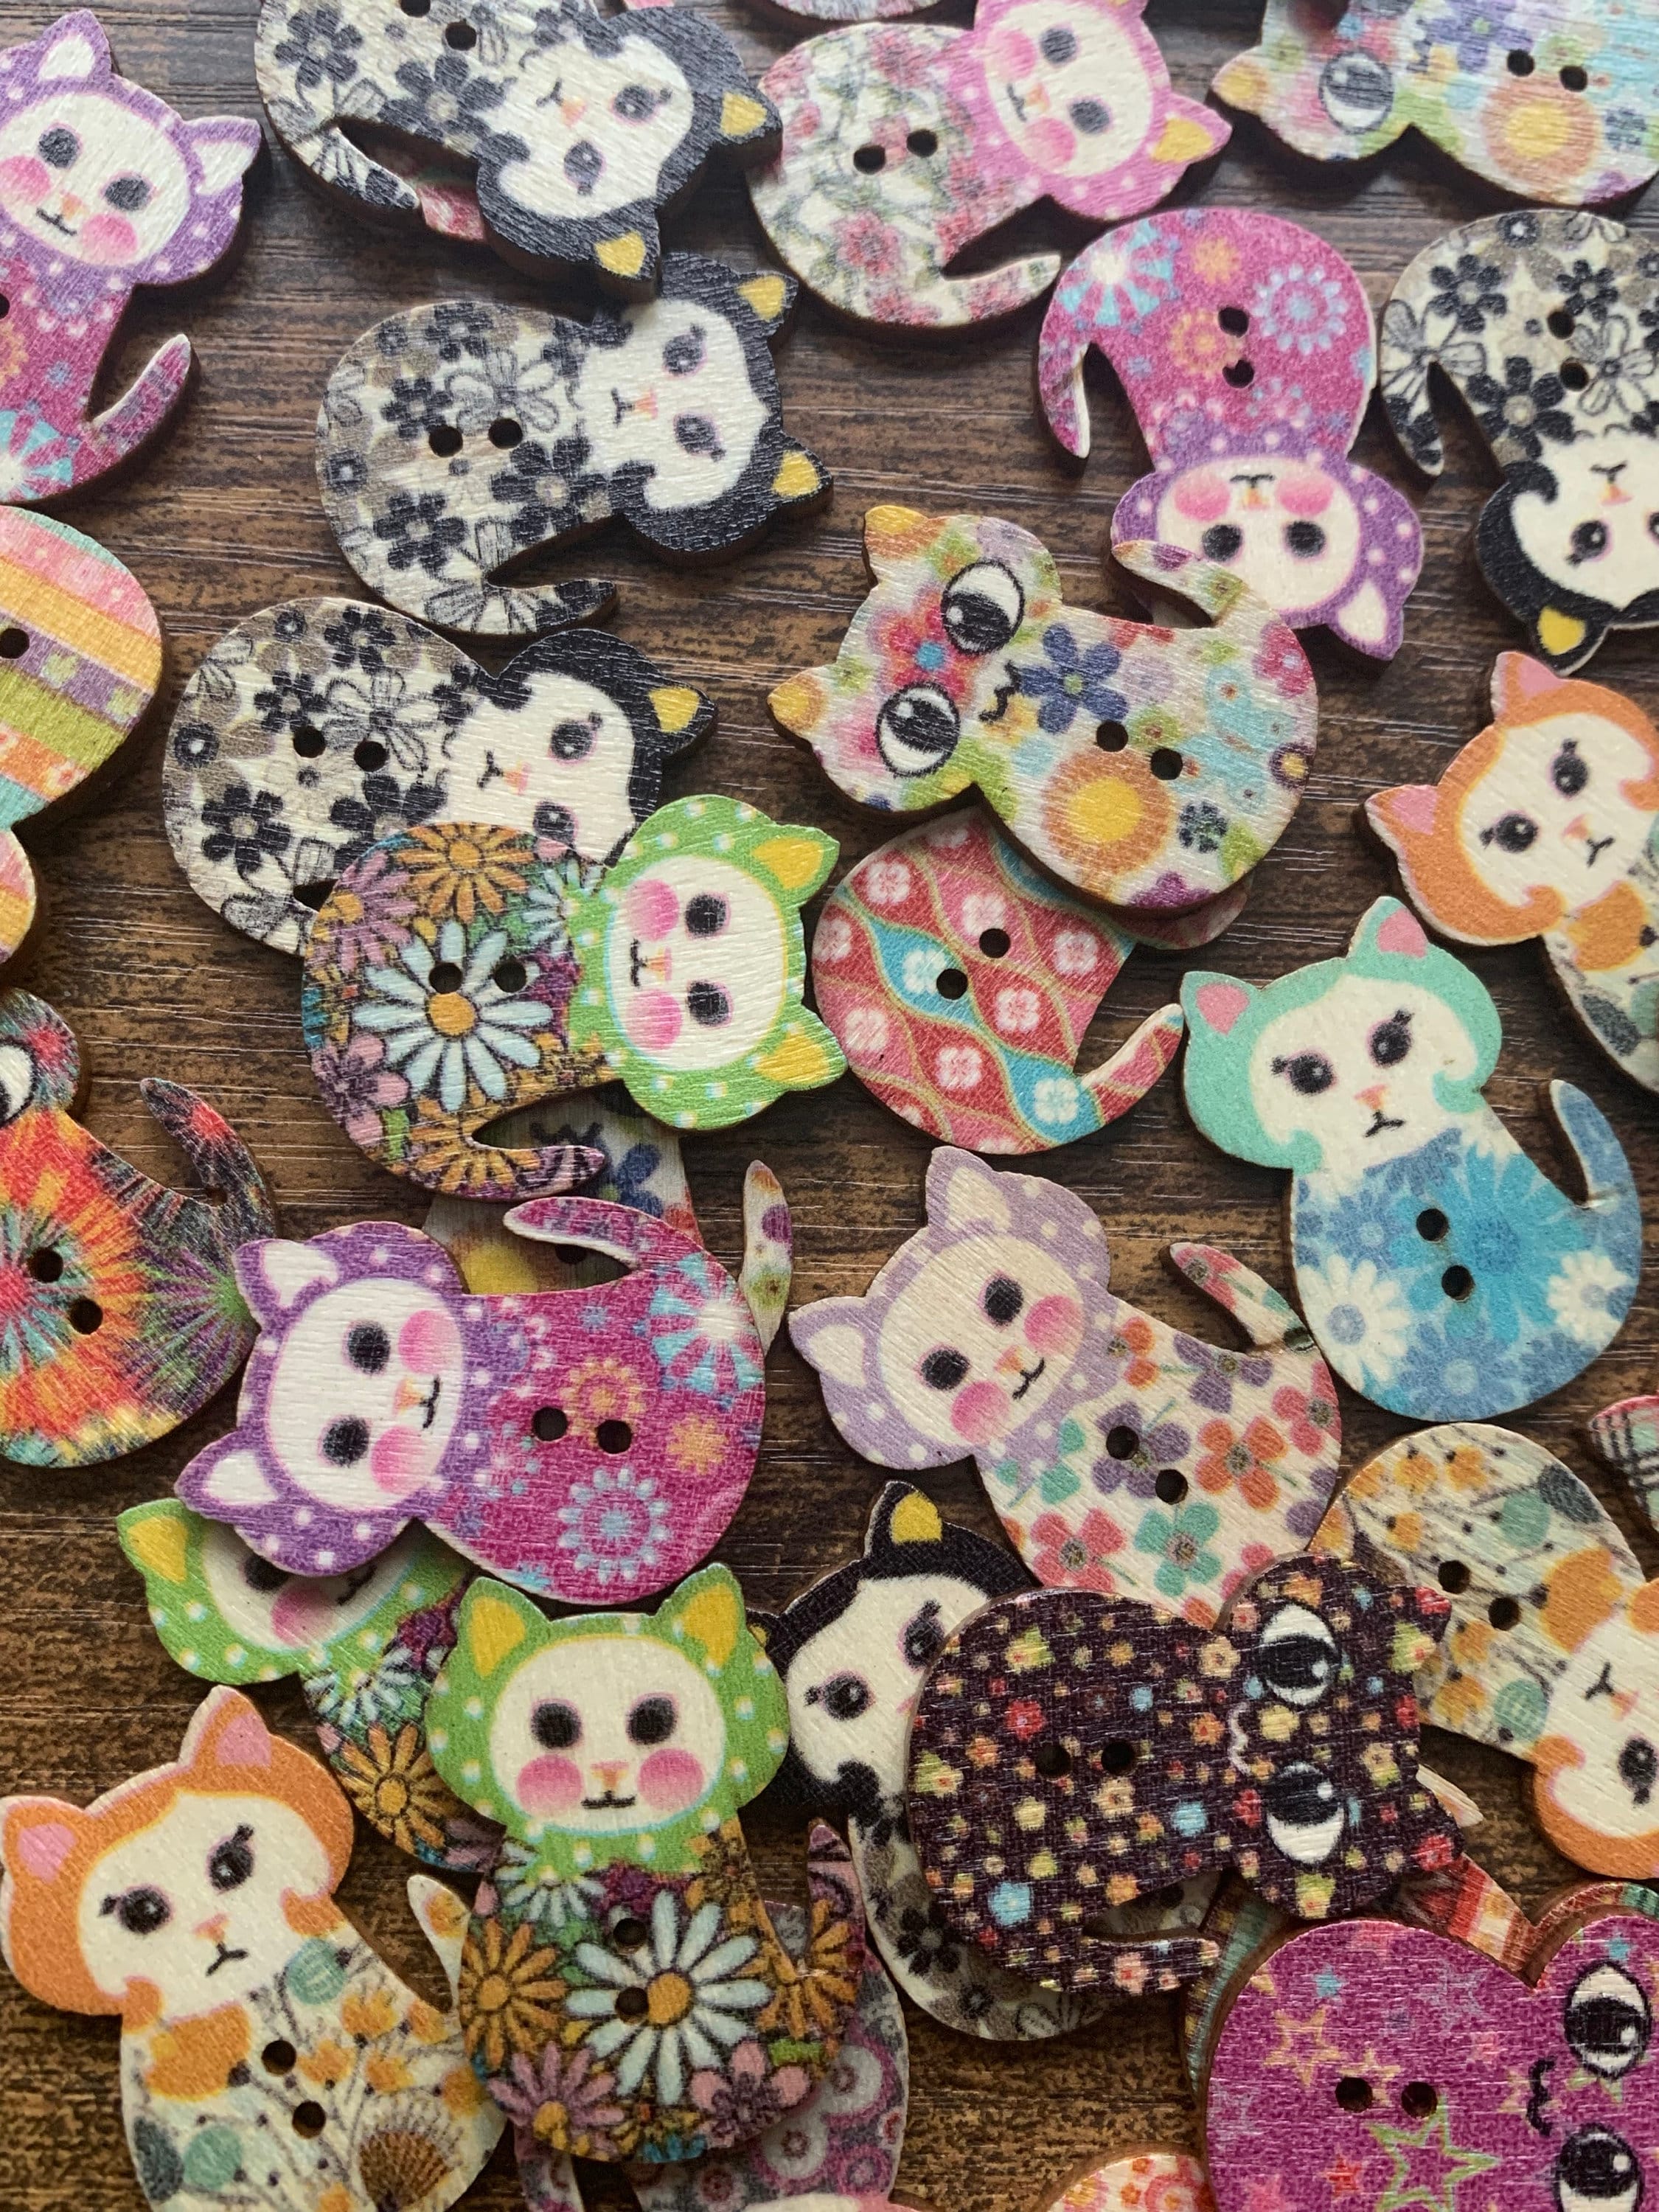 EXCEART 100pcs Decorative Buttons Cat Buttons for Crafts Kids Sewing Button  Vintage Wood Animal Shaped Buttons DIY Ornament Buttons Sweater Buttons